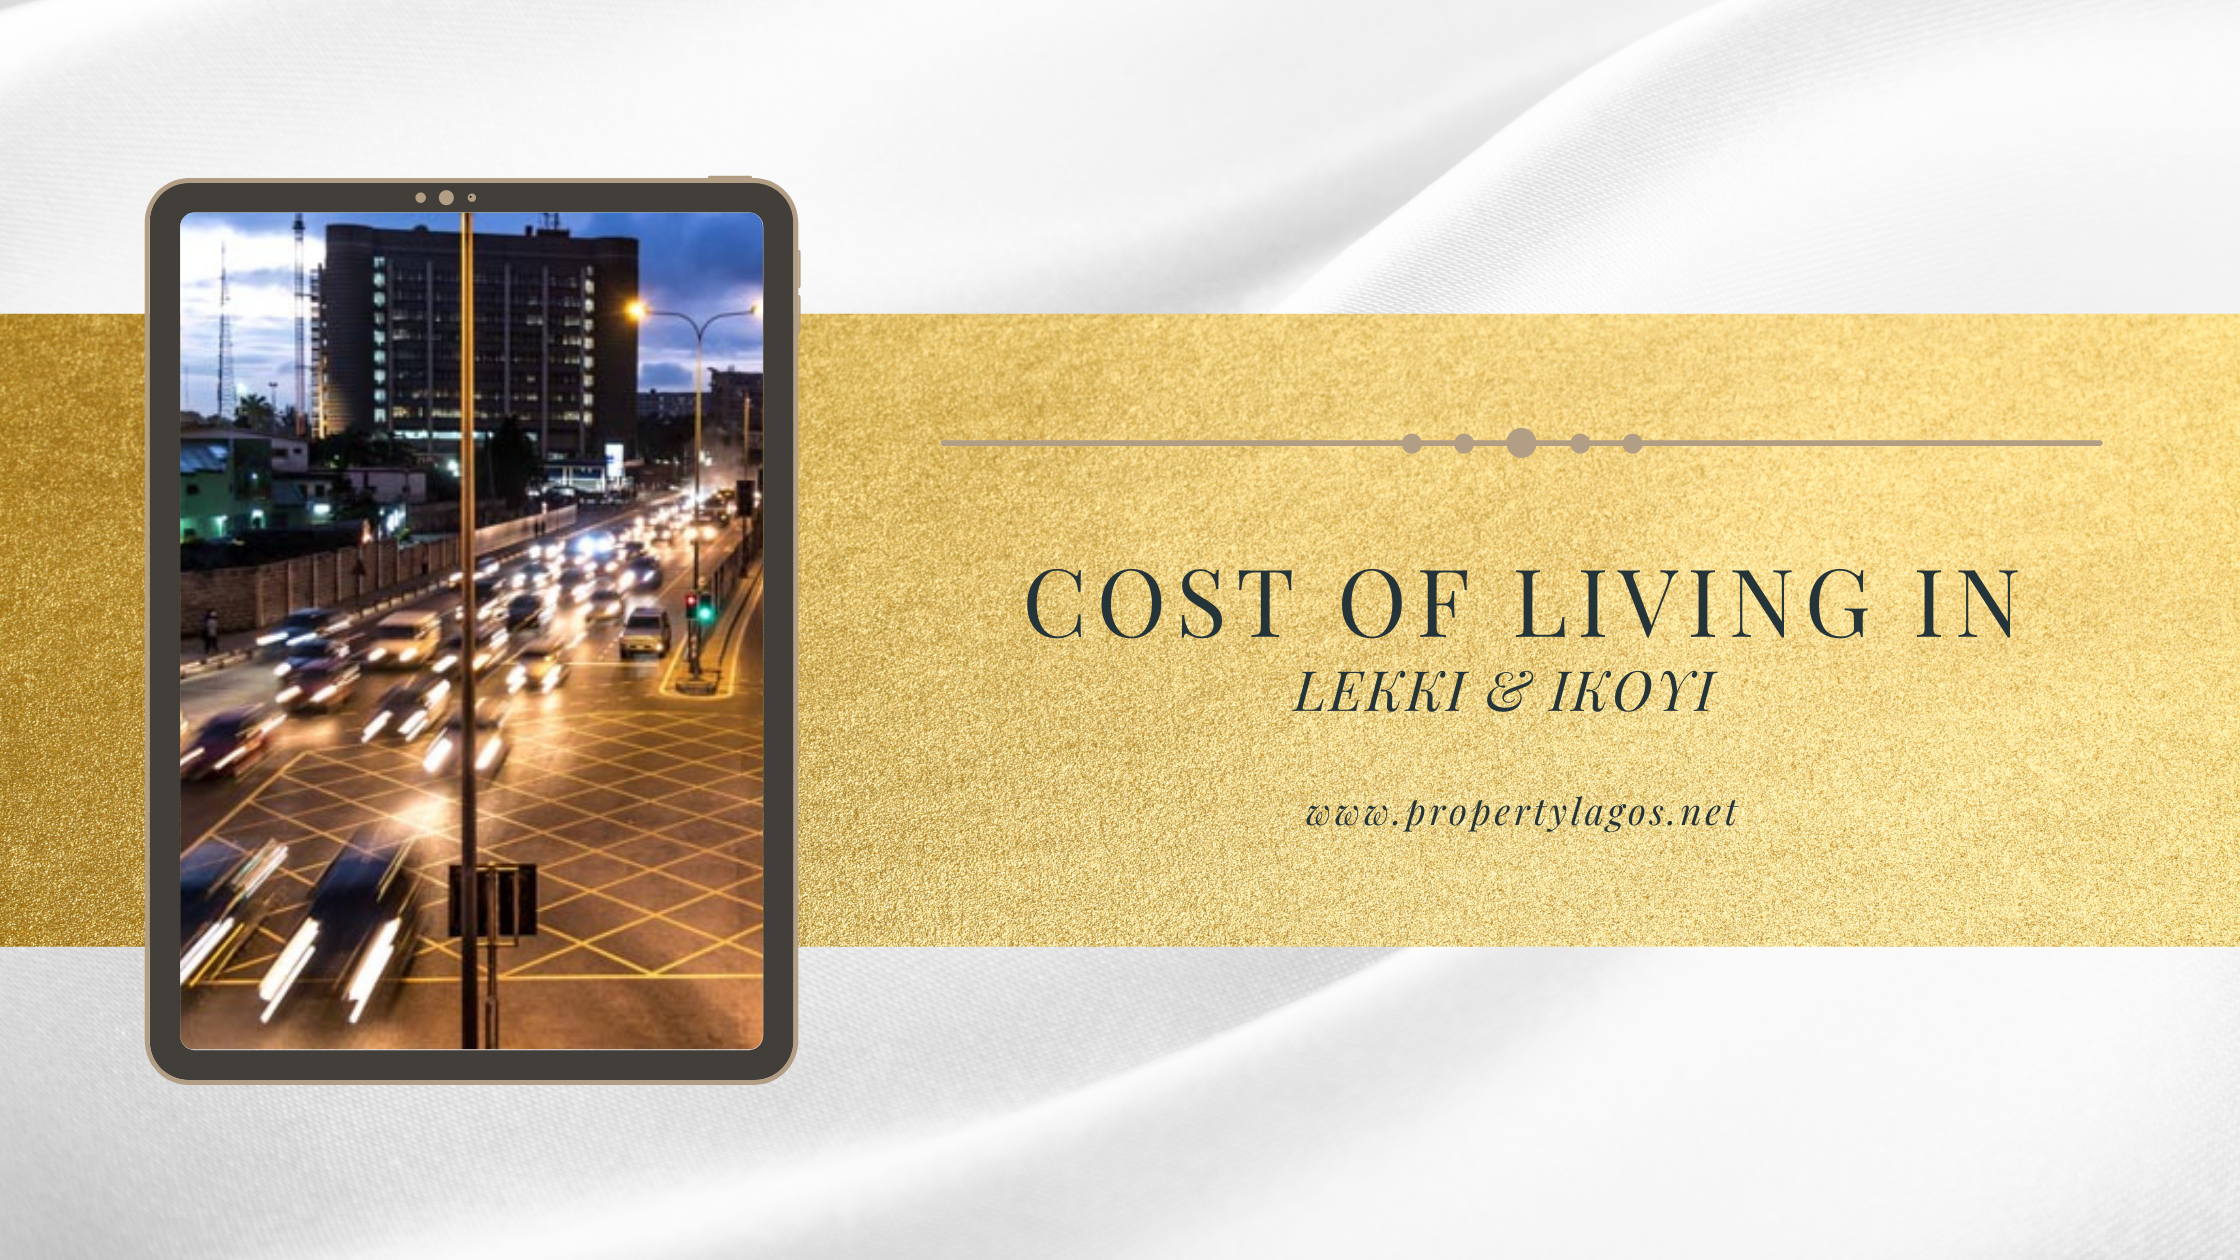 Cost of living in Lekki and Ikoyi